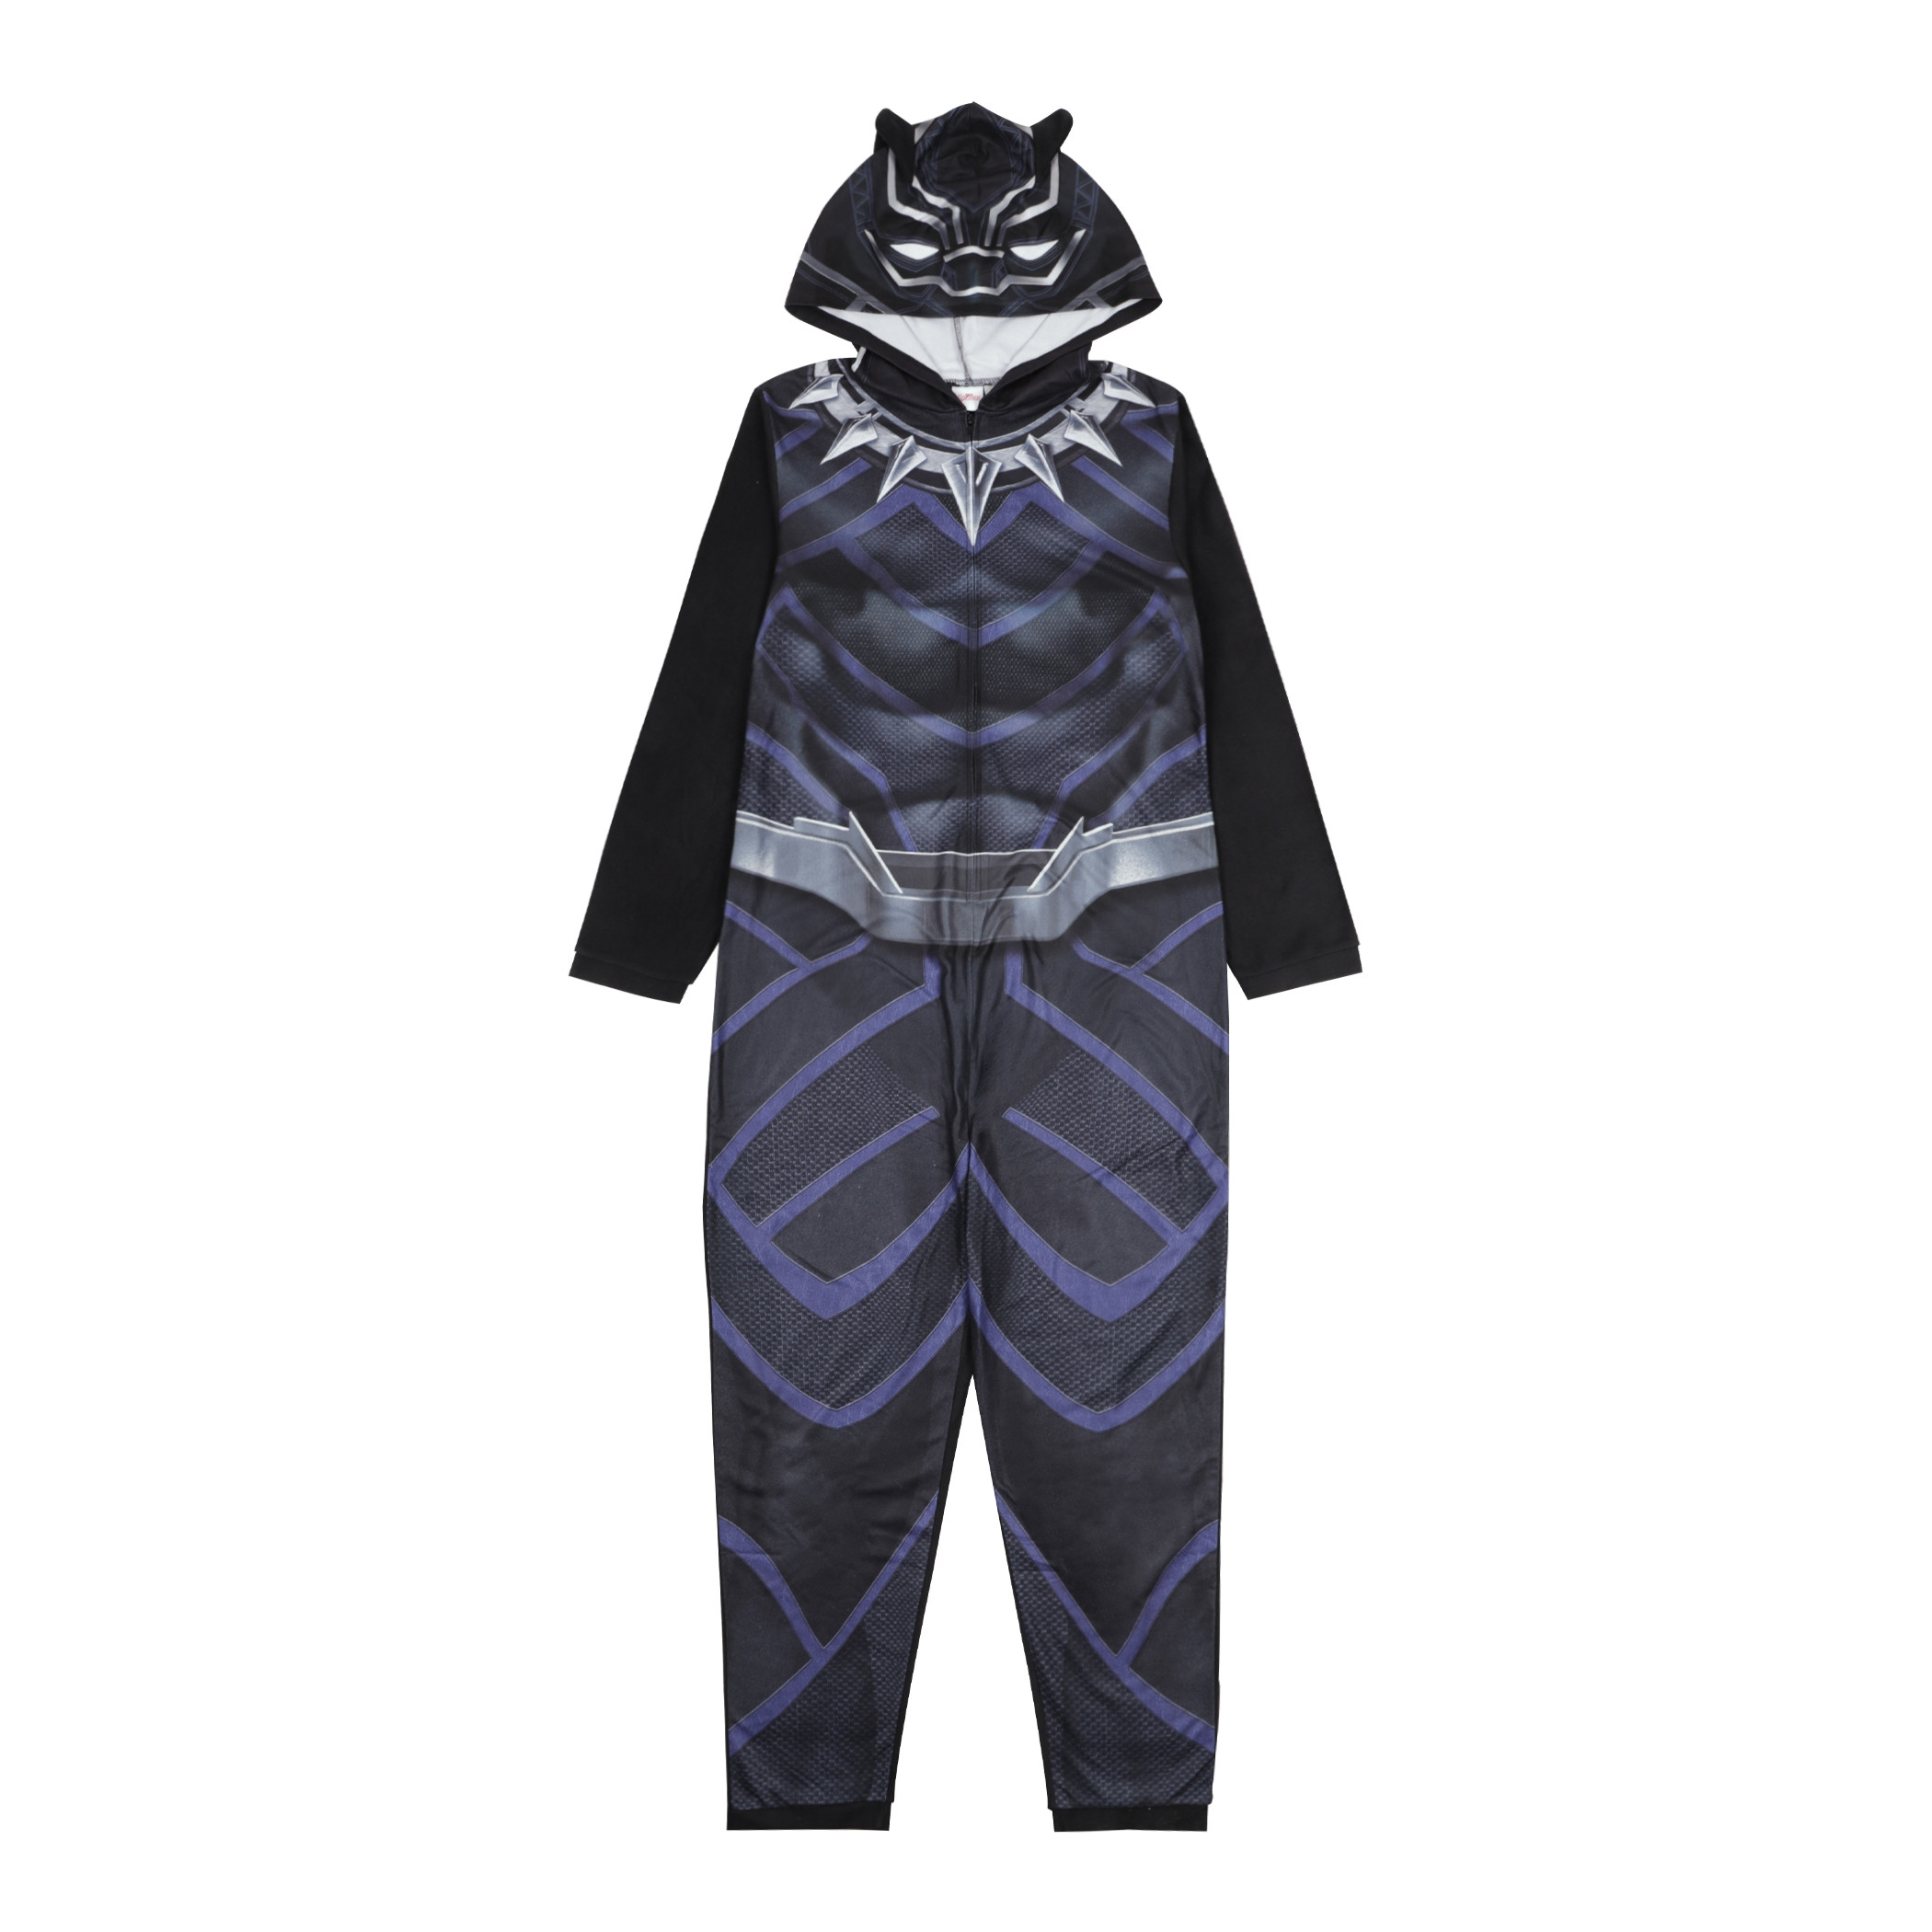 Black Panther Hooded Union Suit